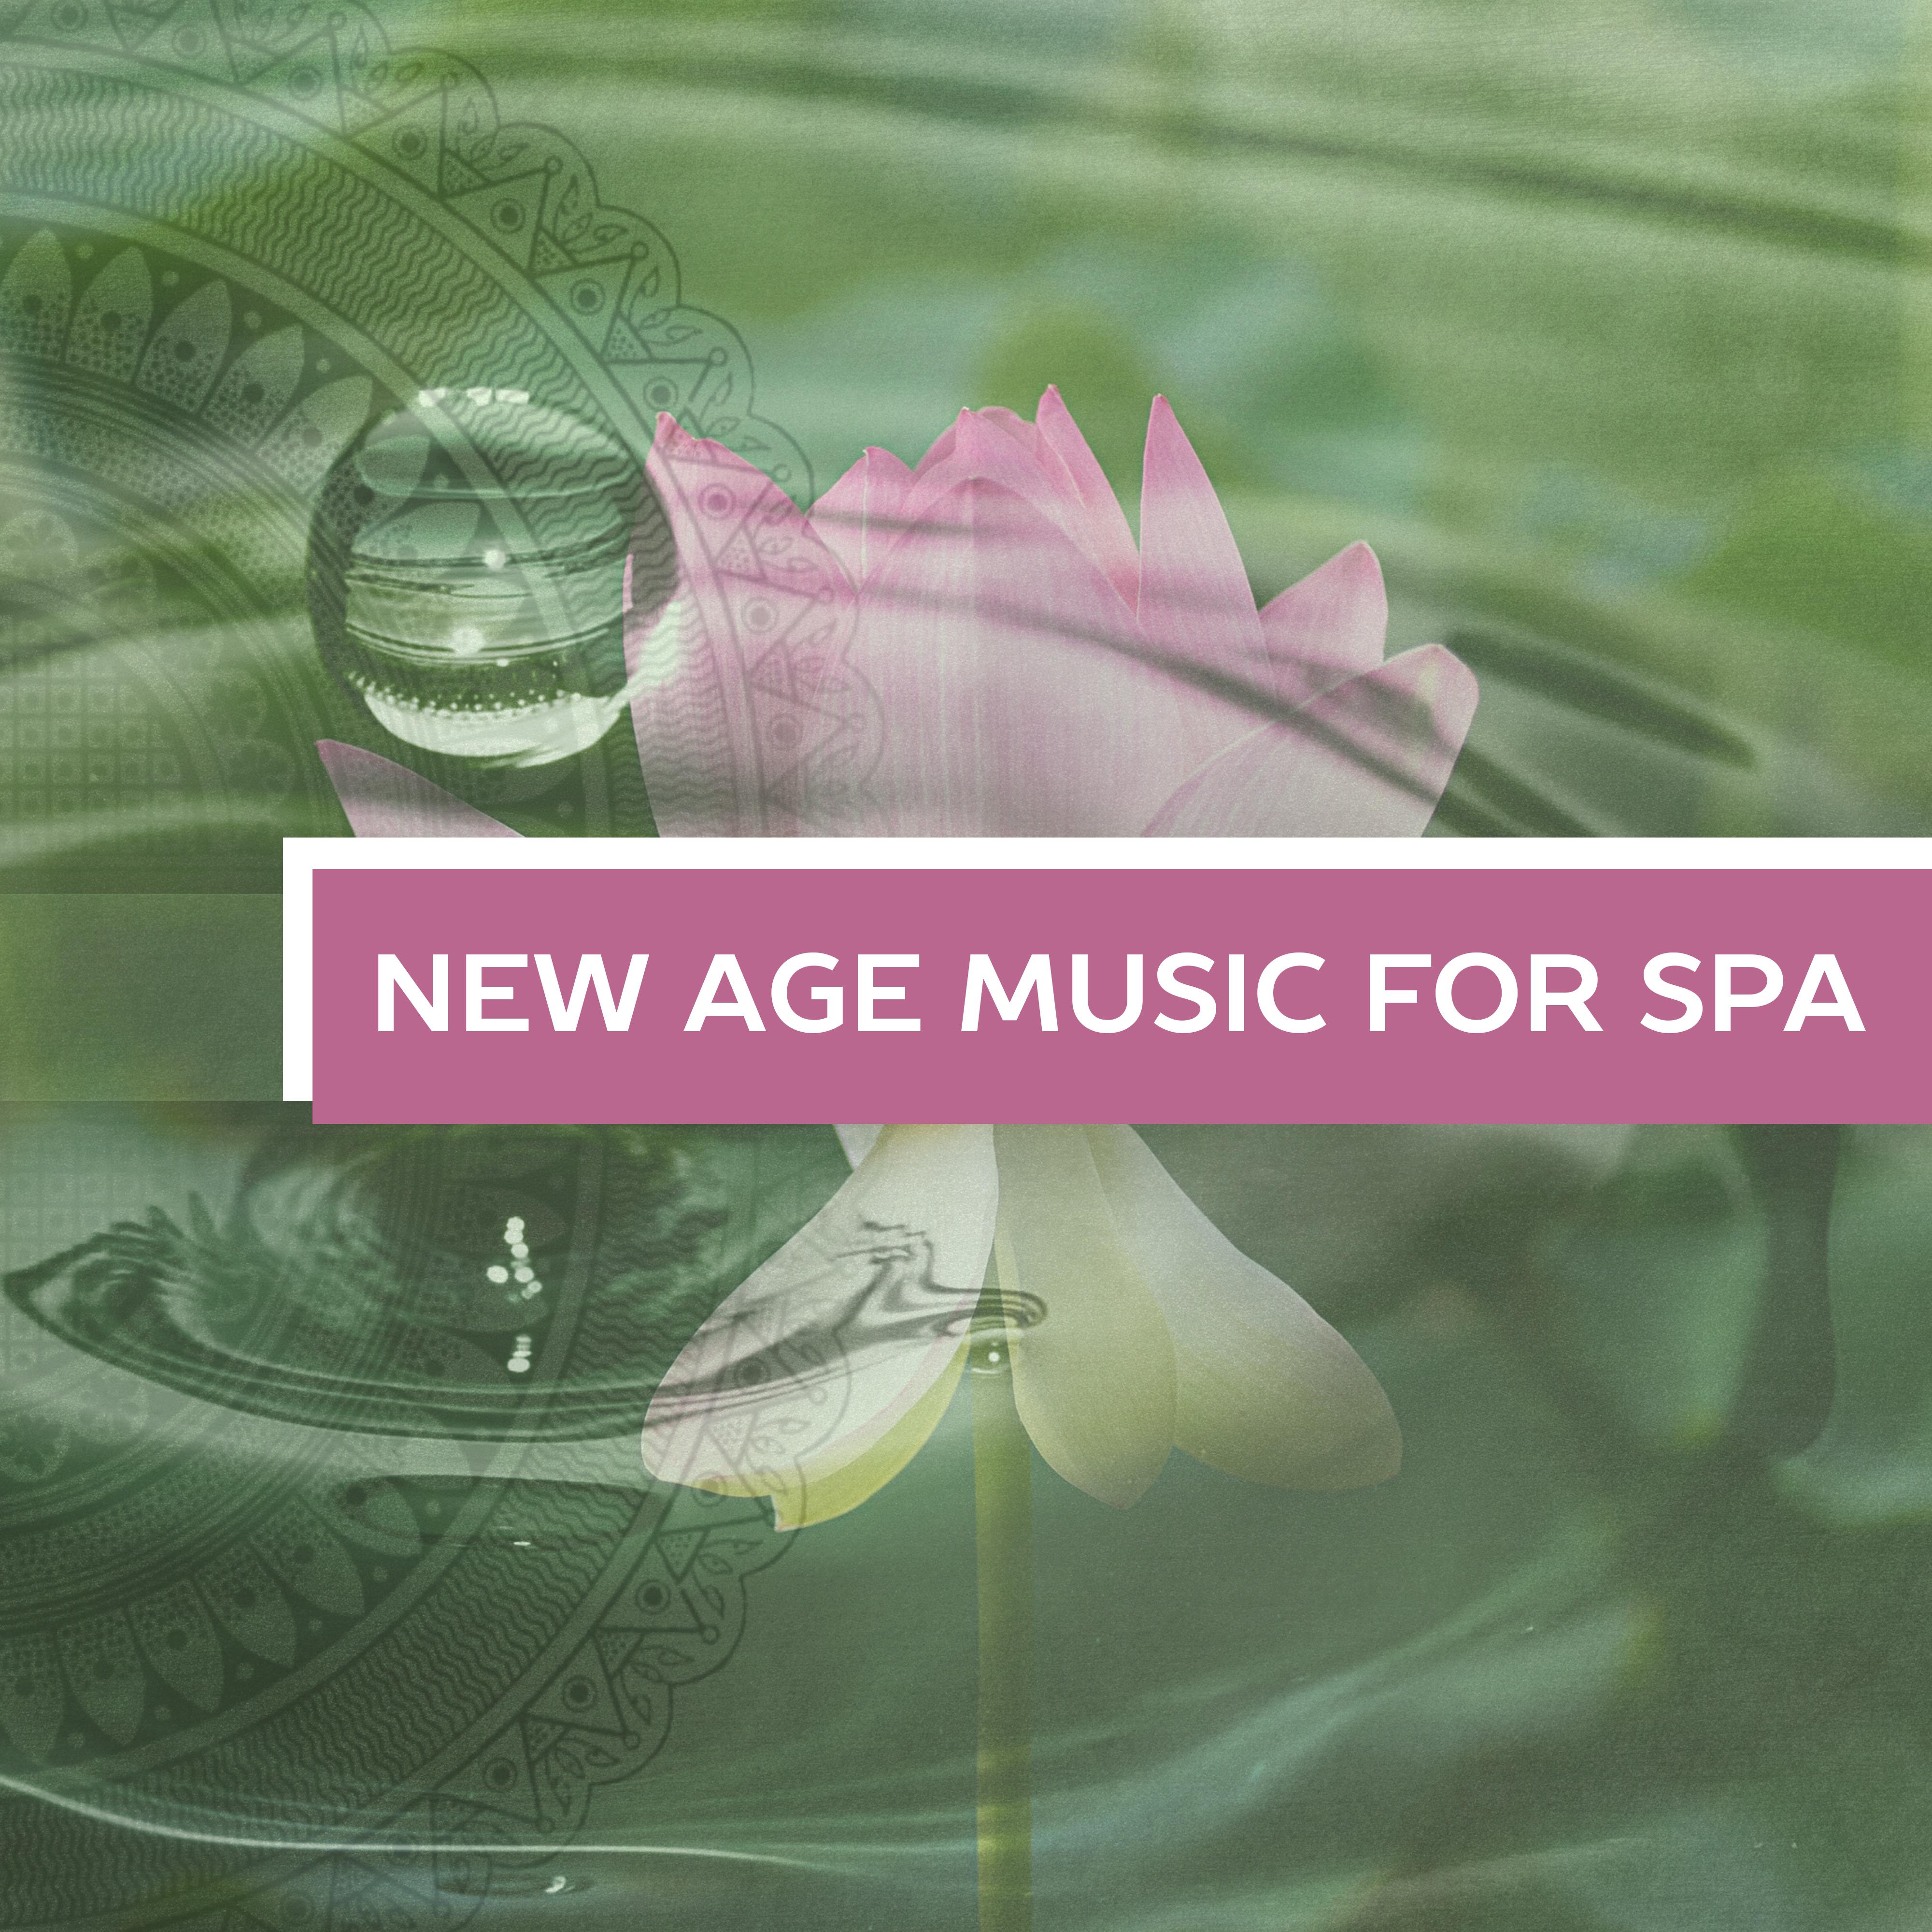 New Age Music for Spa – Stress Free, Pure Relaxation, Spa Dreams, Sensual Massage, Relaxation Wellness, Nature Sounds, Spa Music